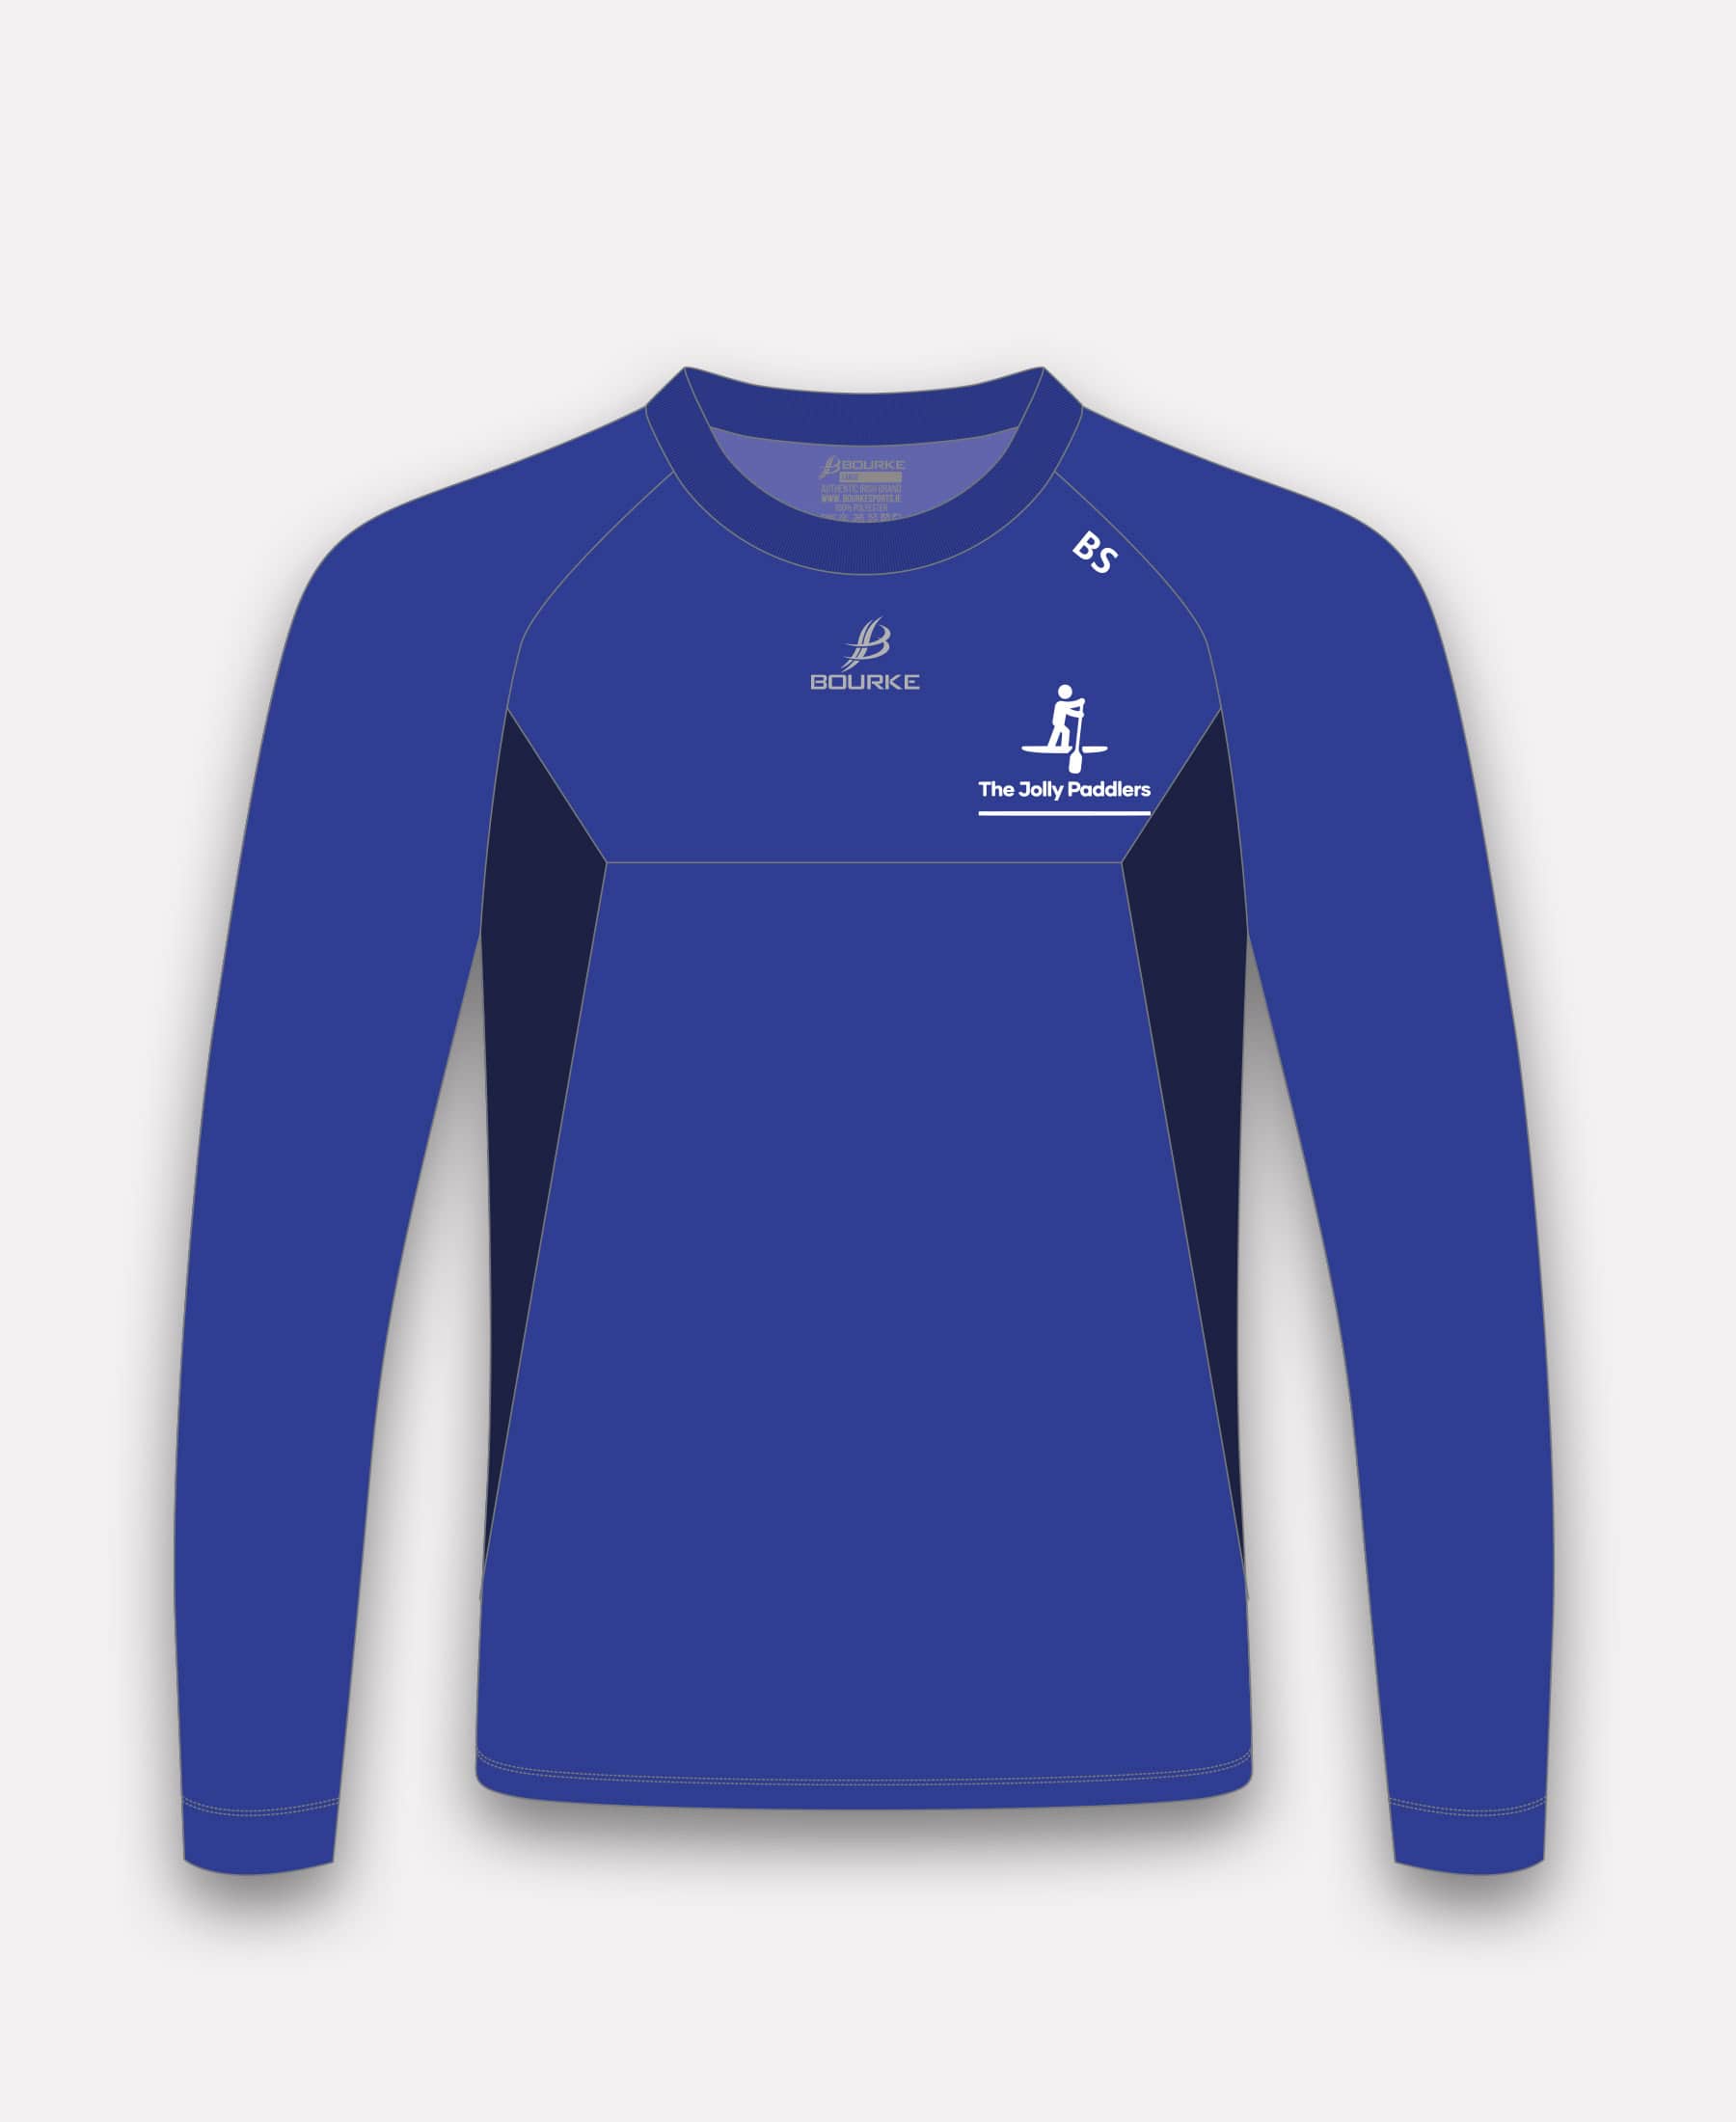 The Jolly Paddlers BARR Crew Neck (Blue/Navy)